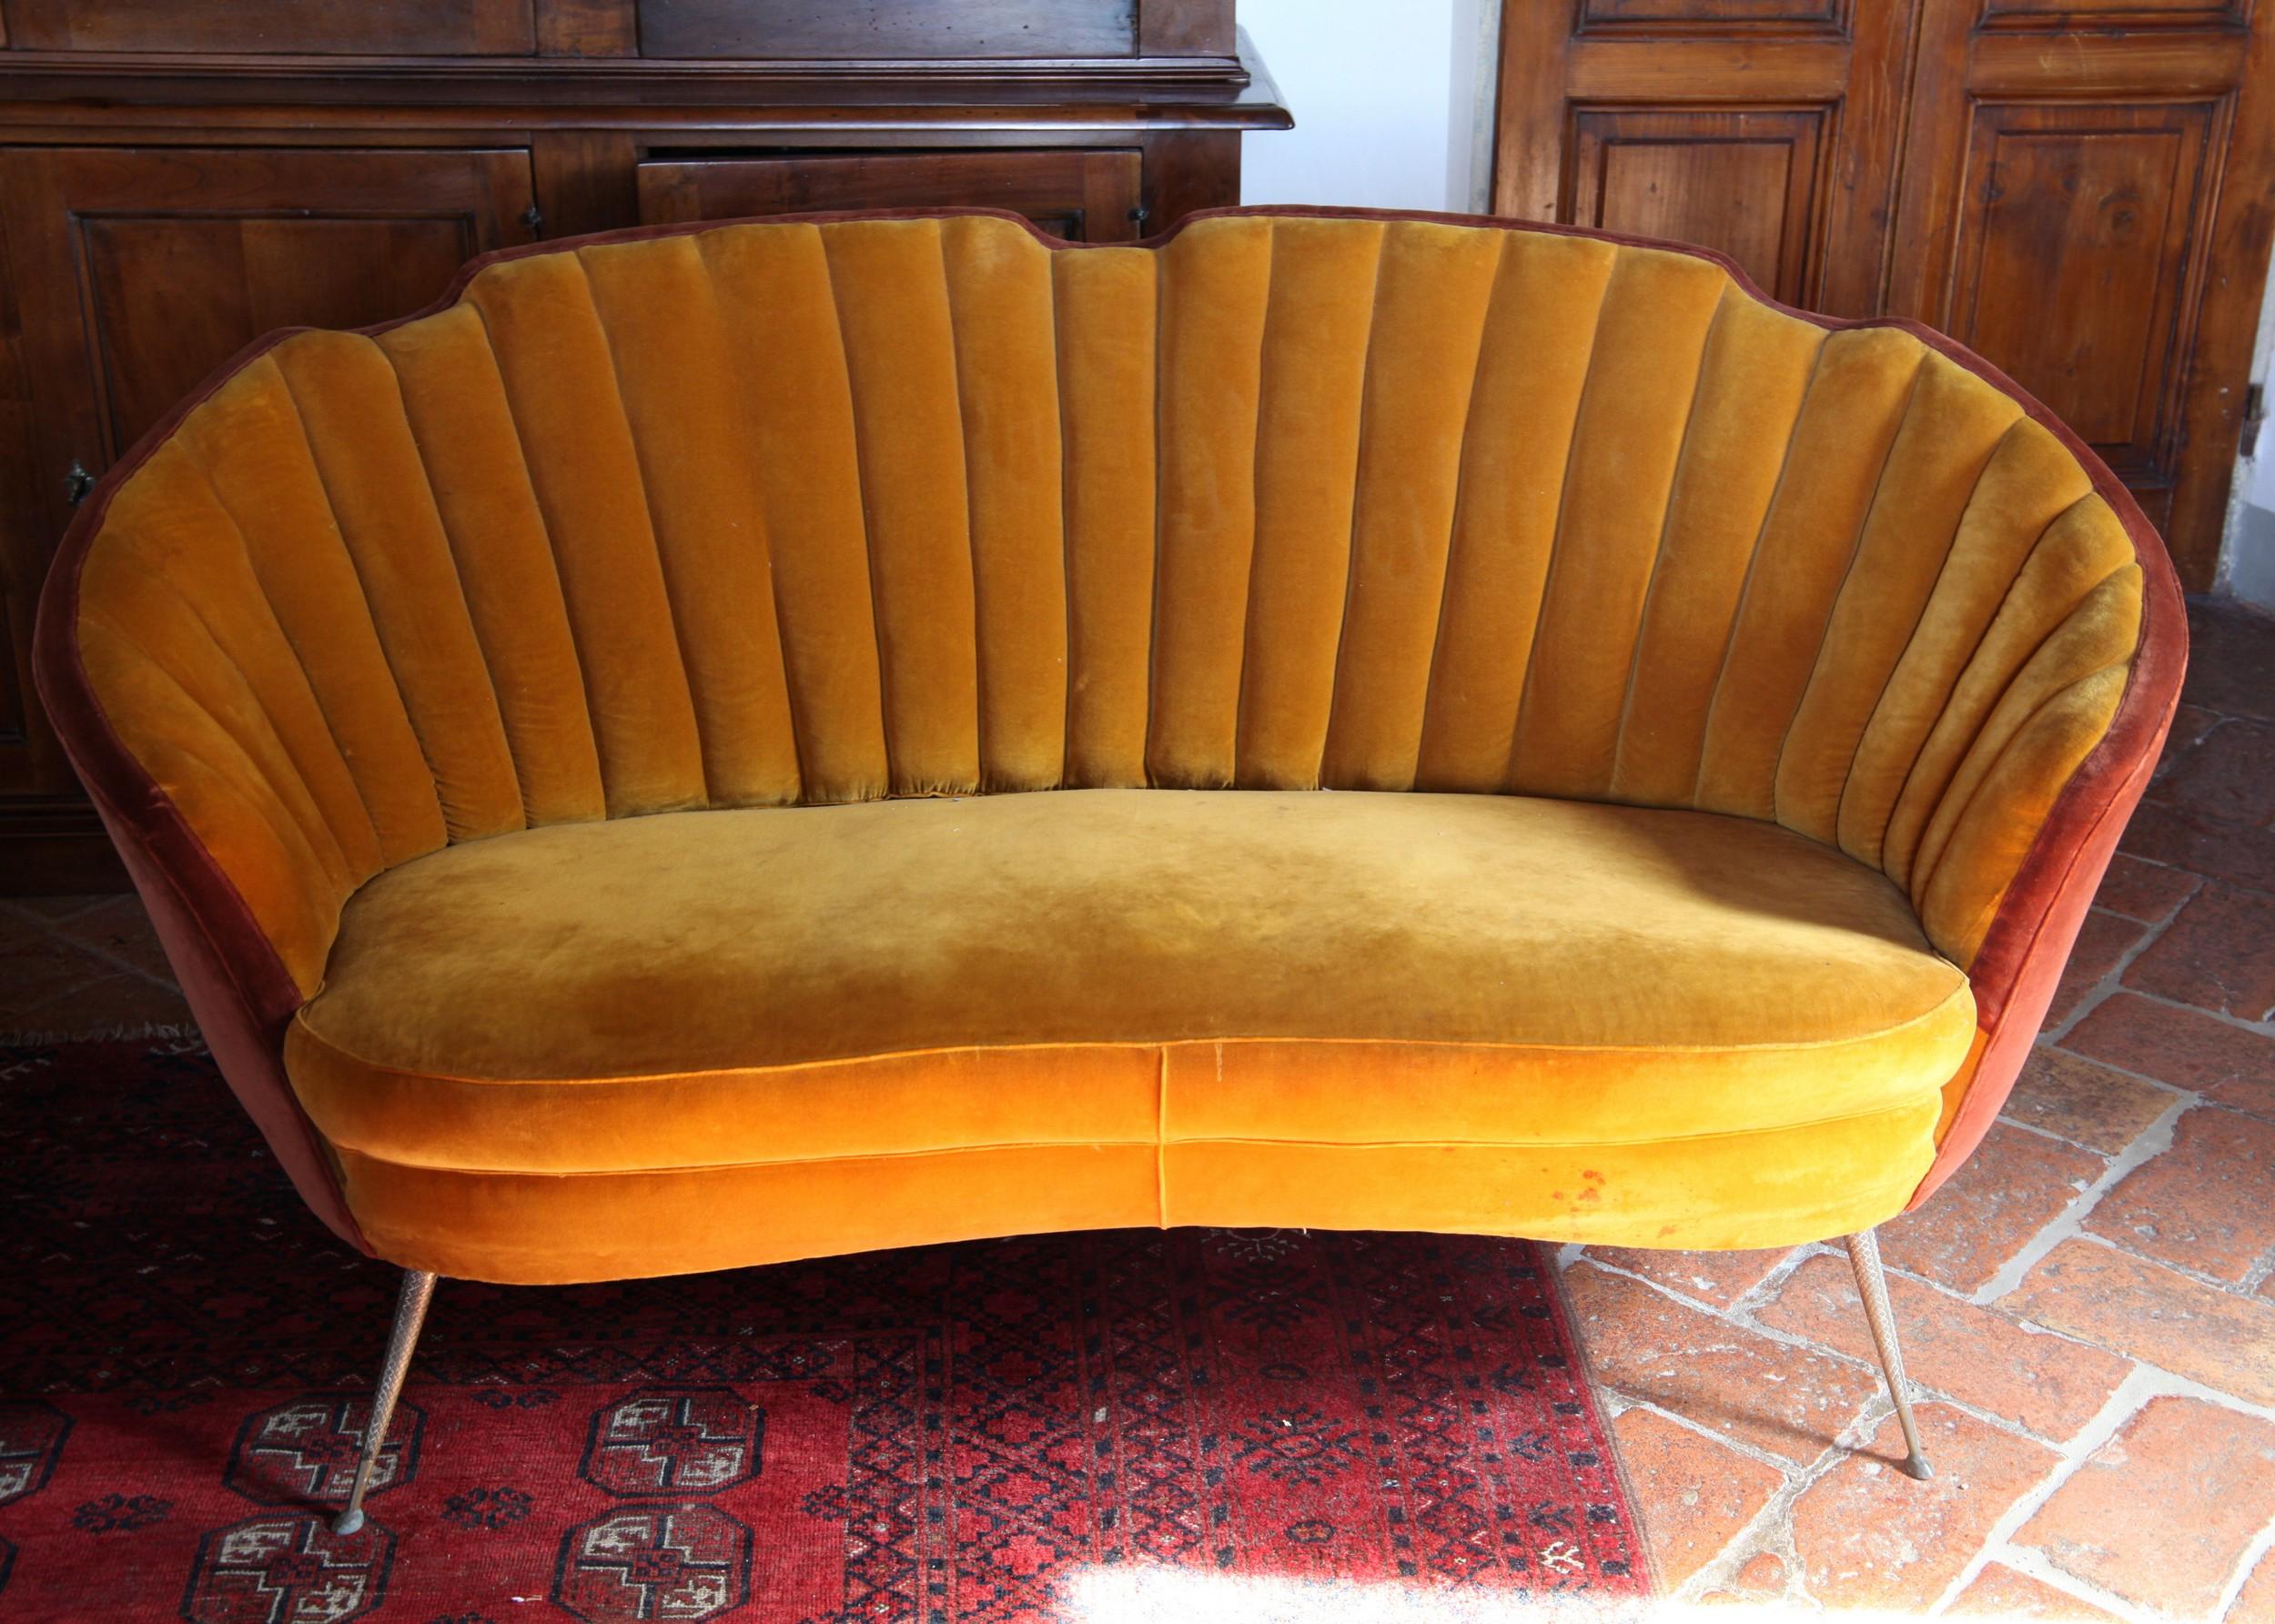 Update: This is the sofa which is part of the group with two armchairs. The armchairs were published recently on 1stdibs magazine for a stunning home made by Ray Azoulay. See last photo showing how beautiful the chairs are or find the article: A